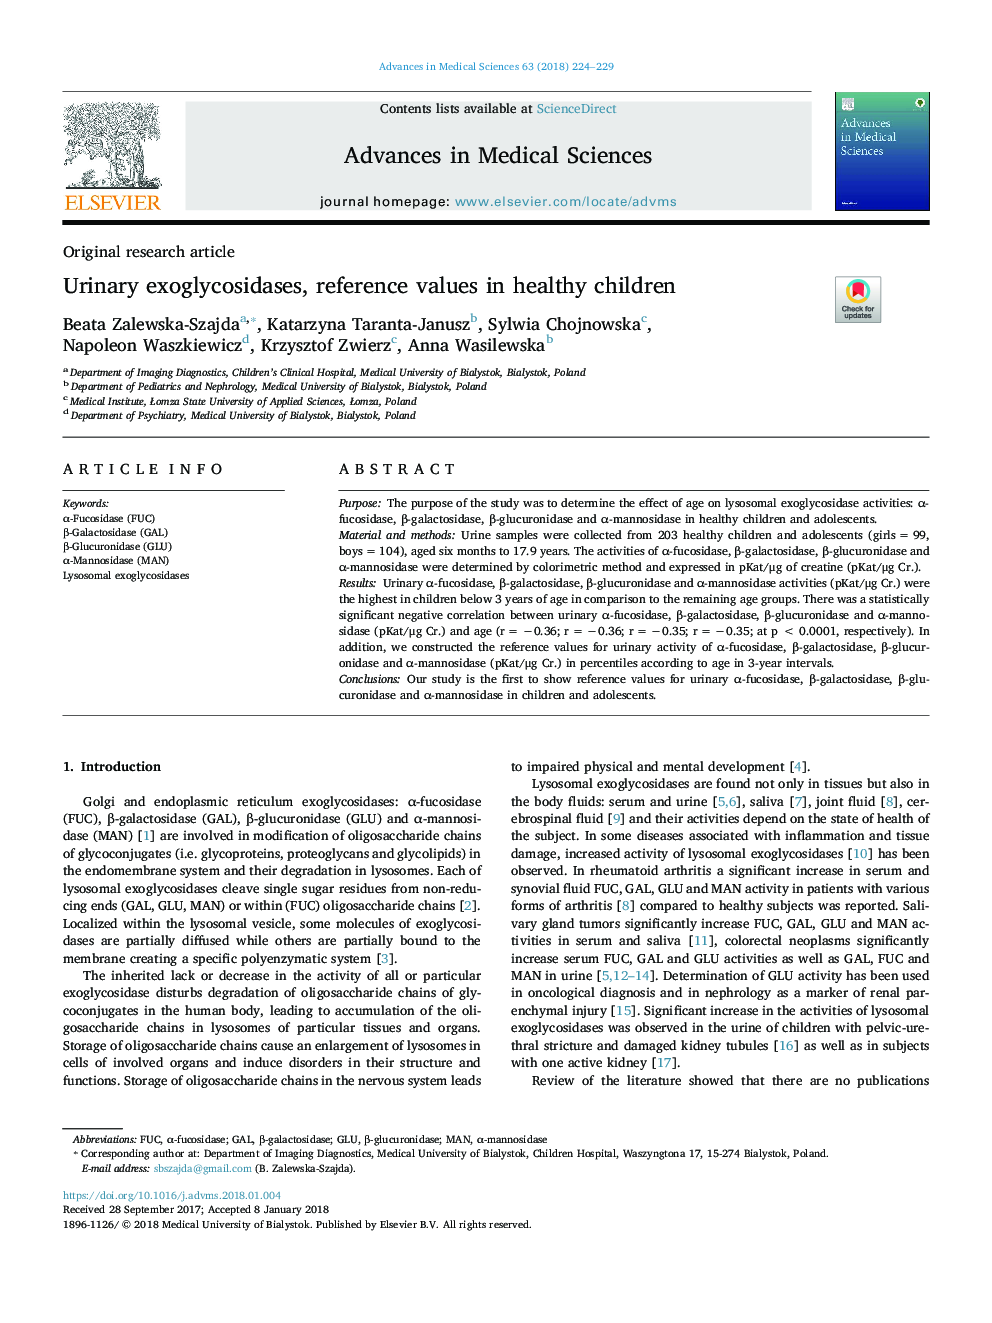 Urinary exoglycosidases, reference values in healthy children